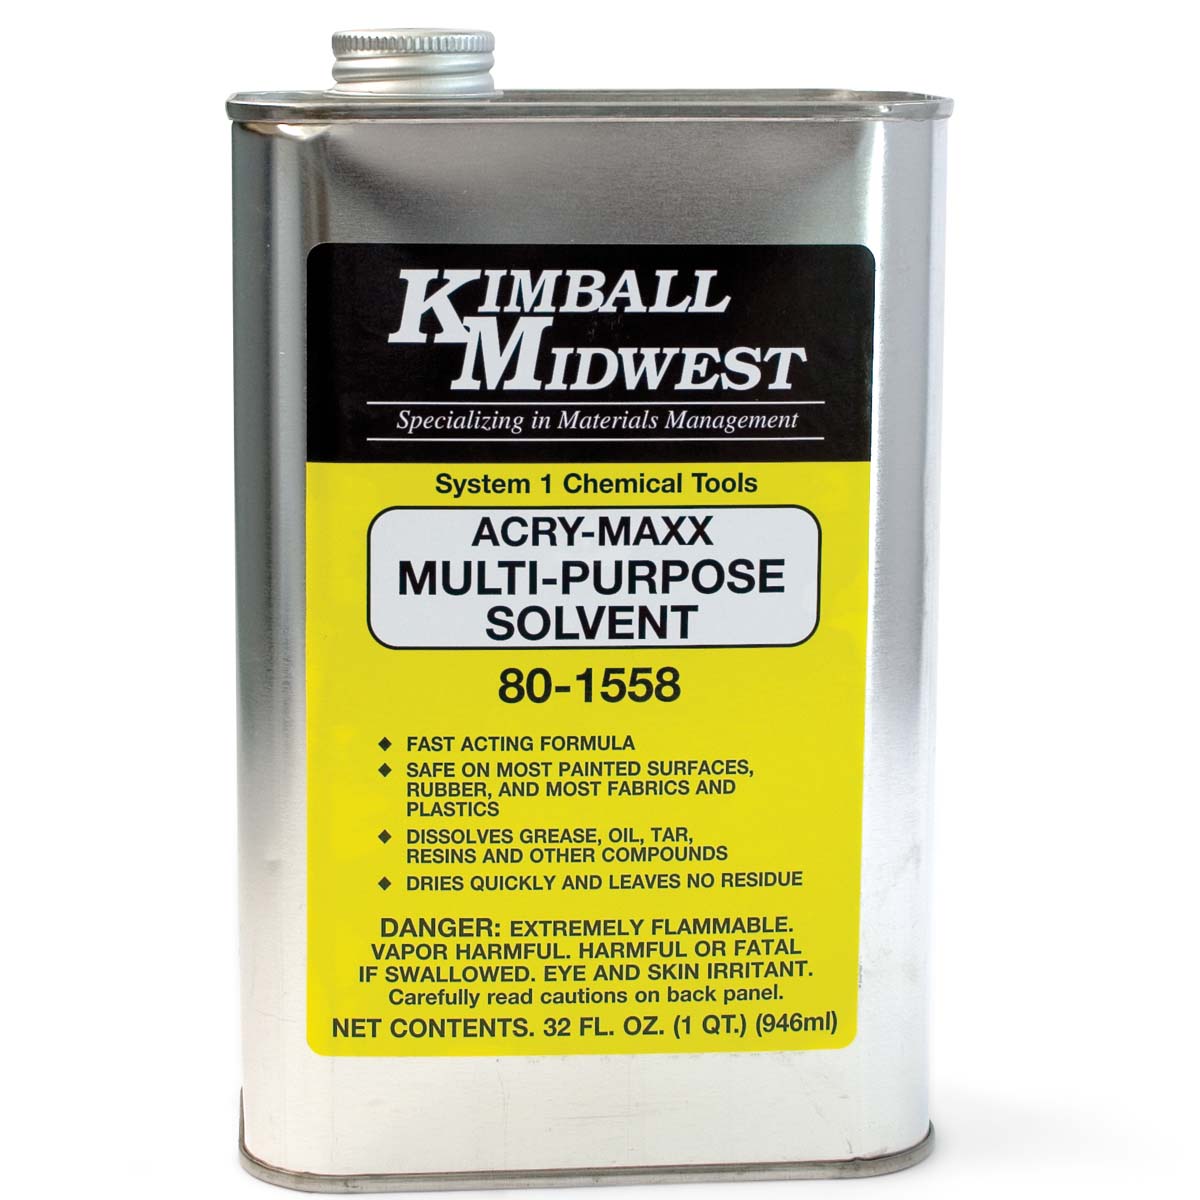 7 x 1 Heavy-Duty Parts Cleaning Brush - Kimball Midwest